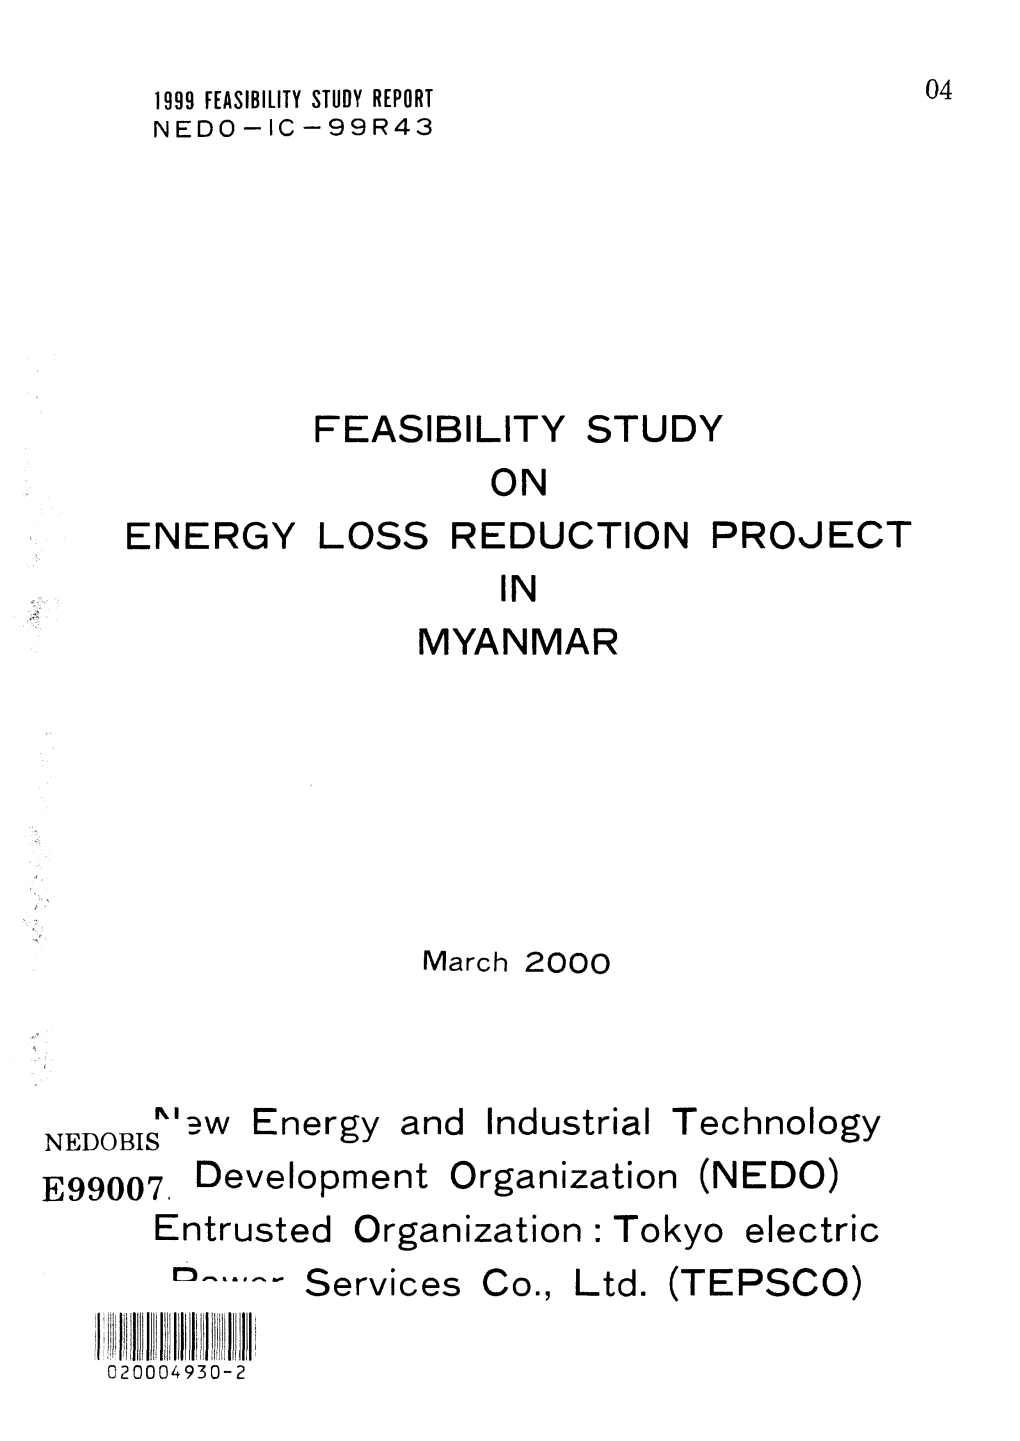 Report on Feasibility Study in Fiscal 1999. Energy Loss Reduction Project